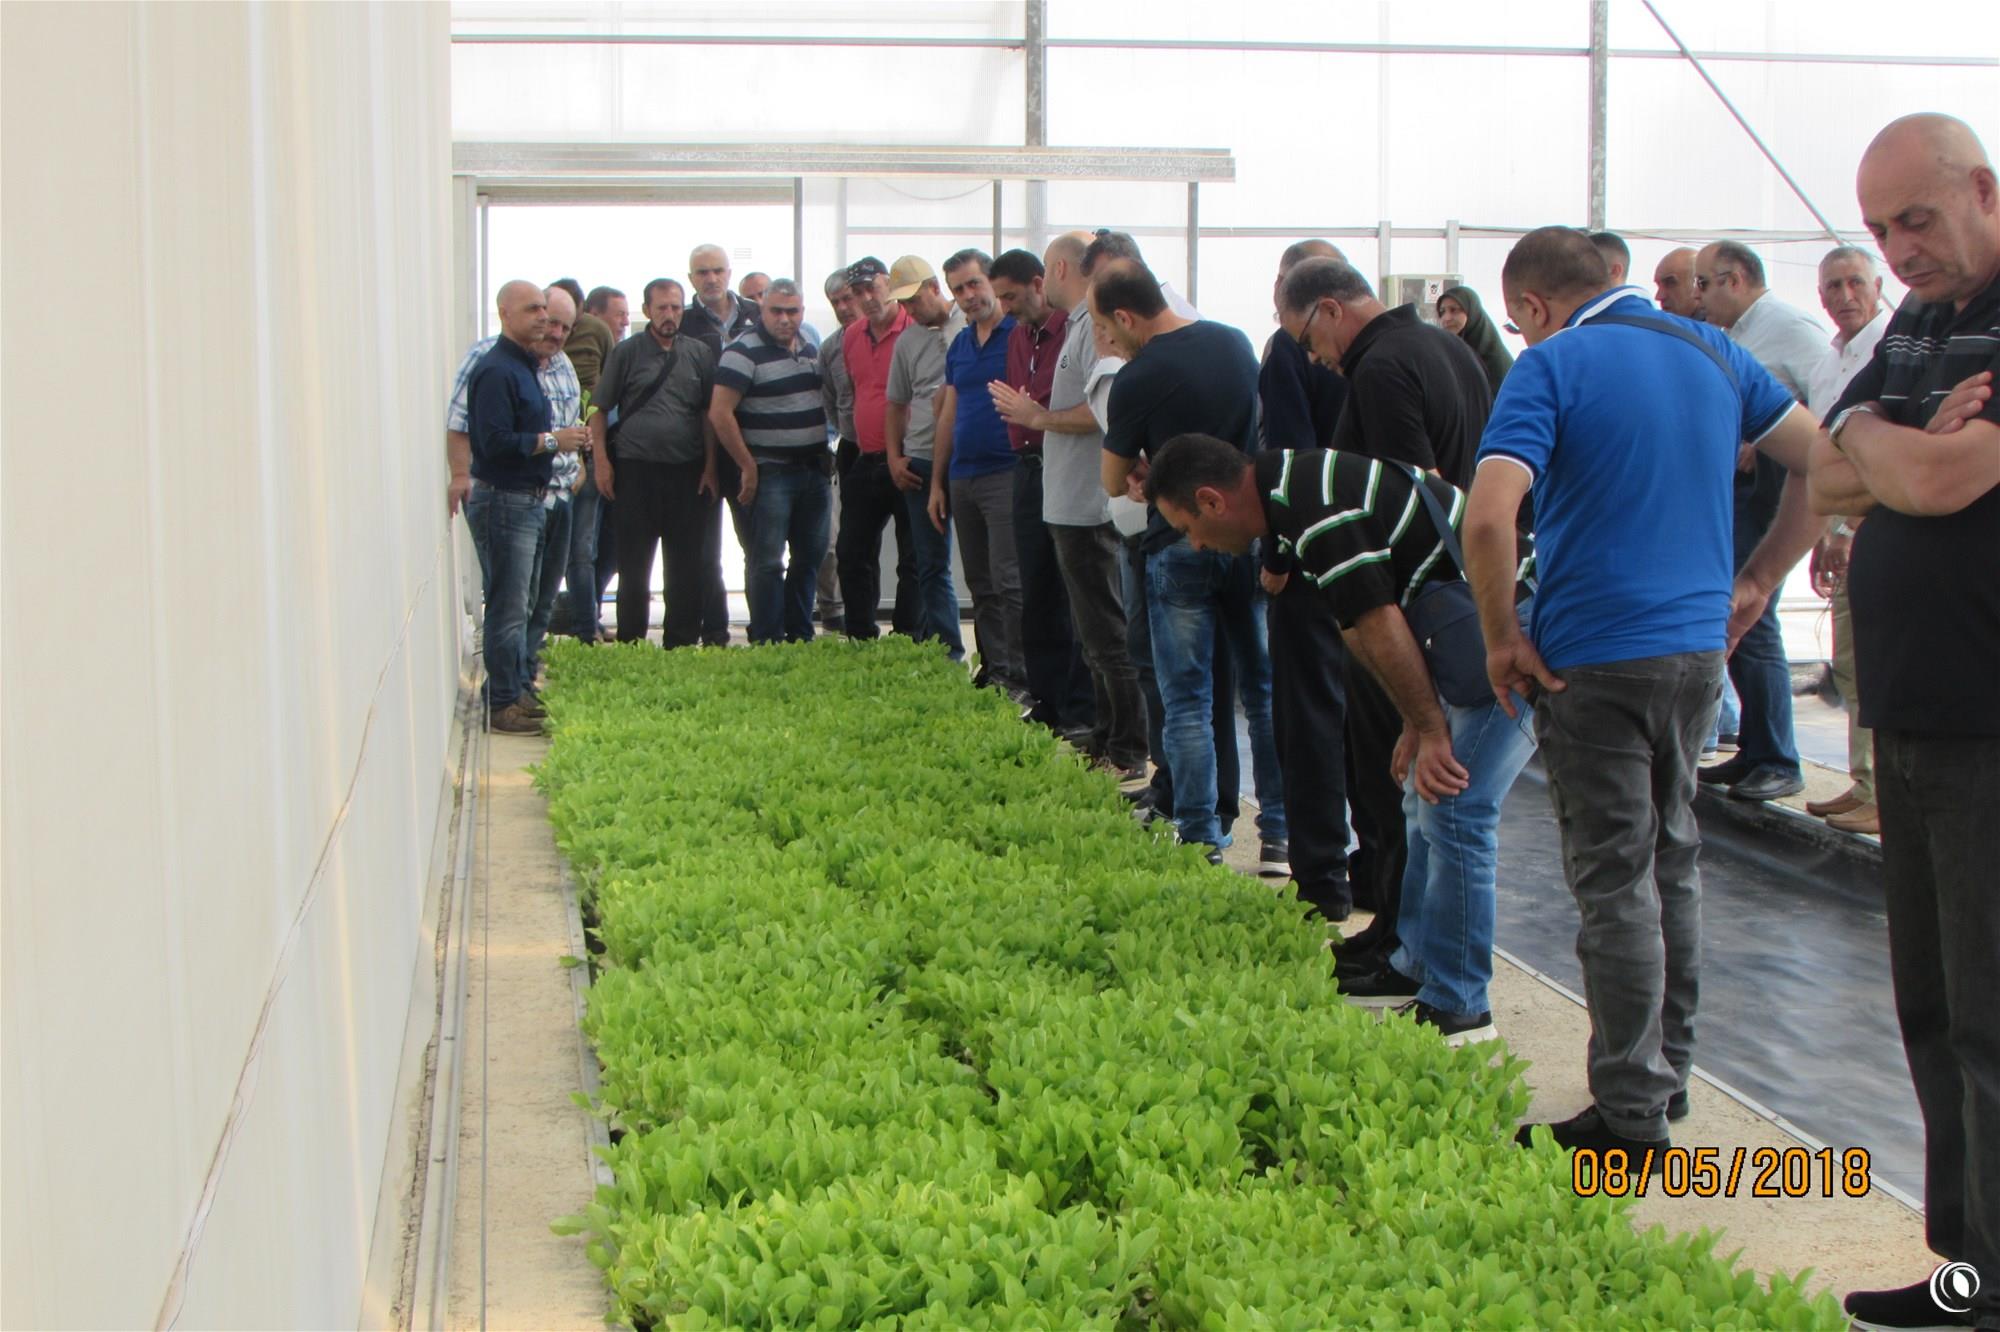 A delegation of tobacco farmers in Turkey to brief on the industry’s latest technologies